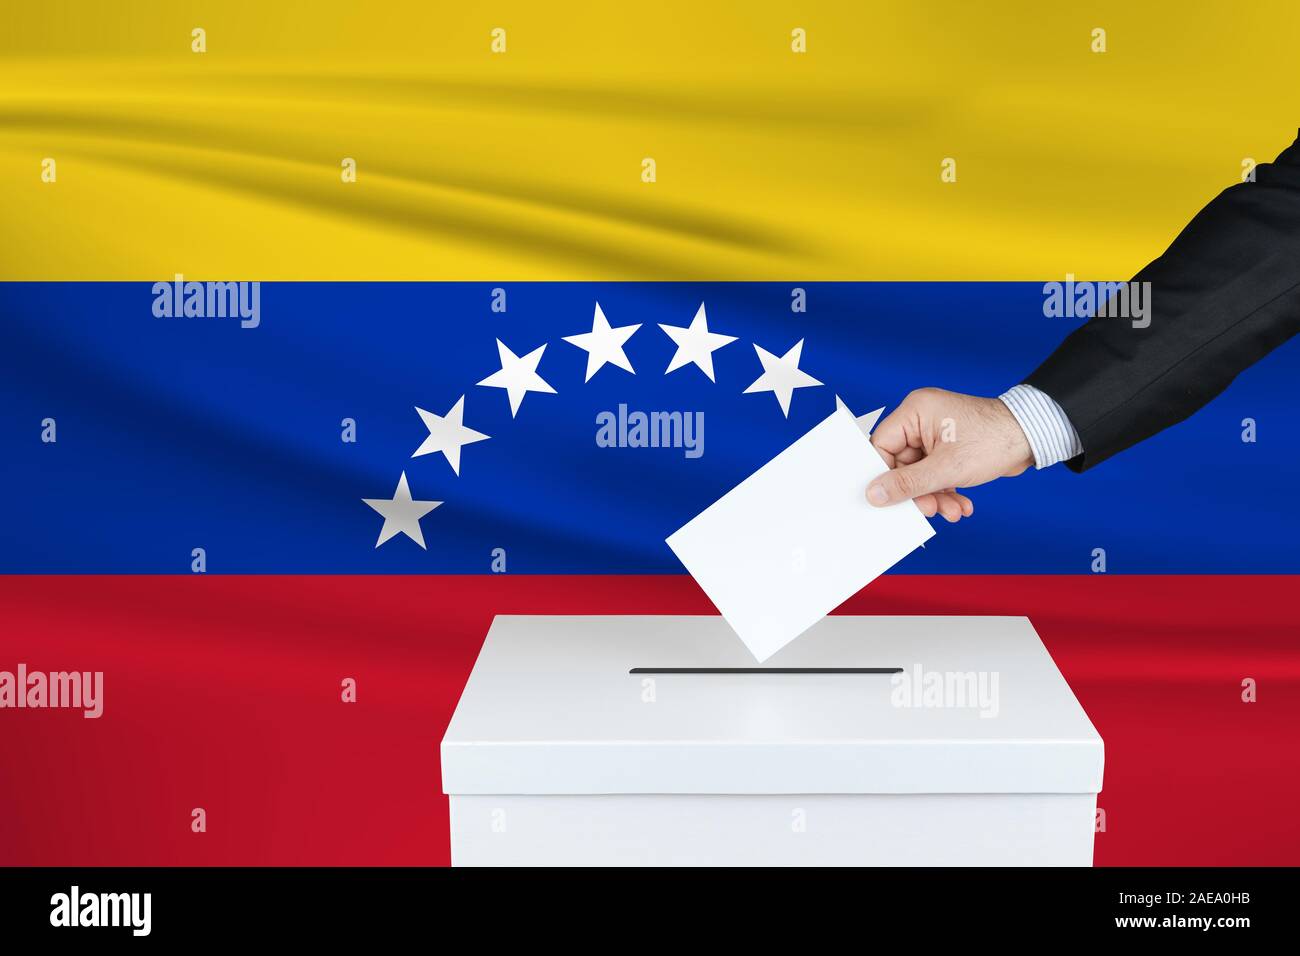 Election in Venezuela. The hand of man putting his vote in the ballot box. Waved Venezuela flag on background. Stock Photo